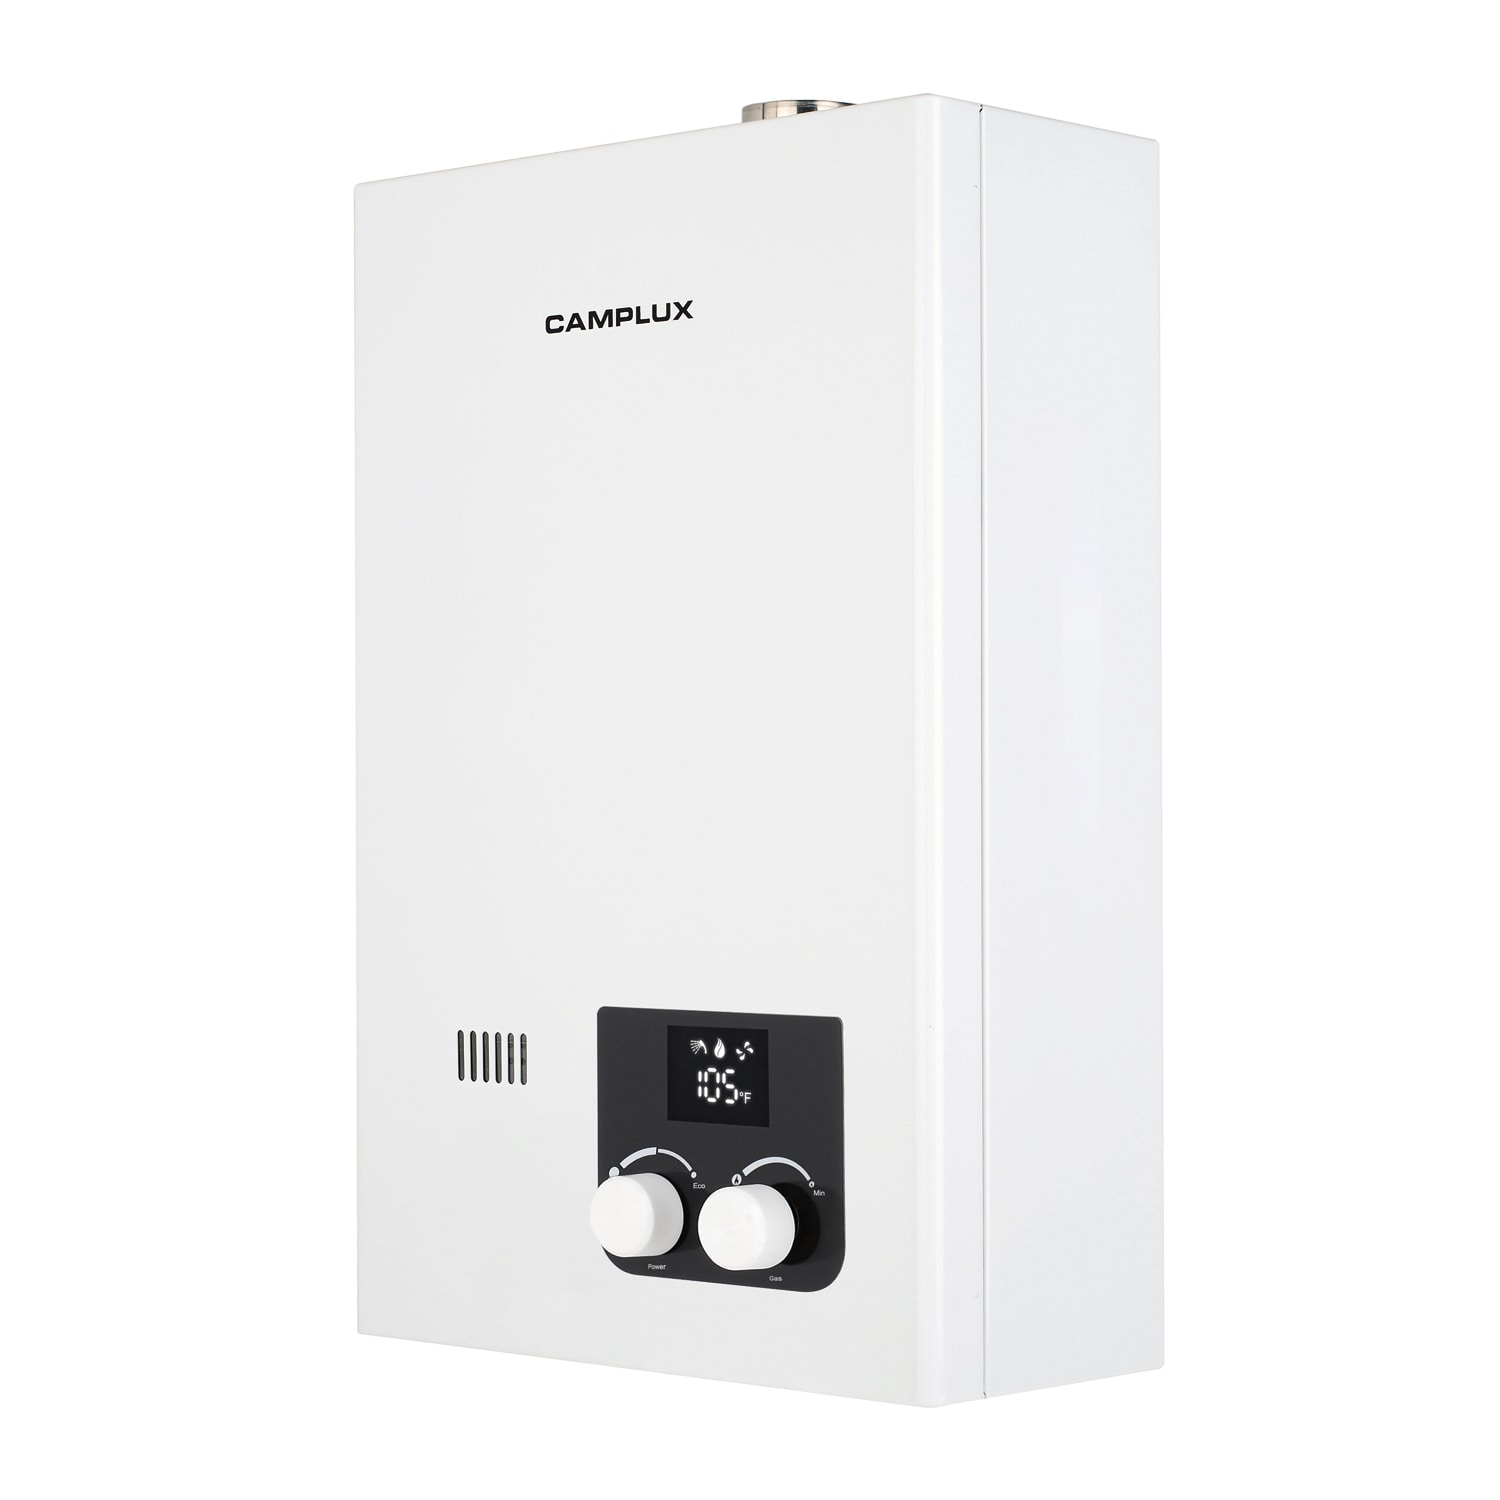 Camplux 3.18 GPM Indoor Residential Propane Tankless Water Heater